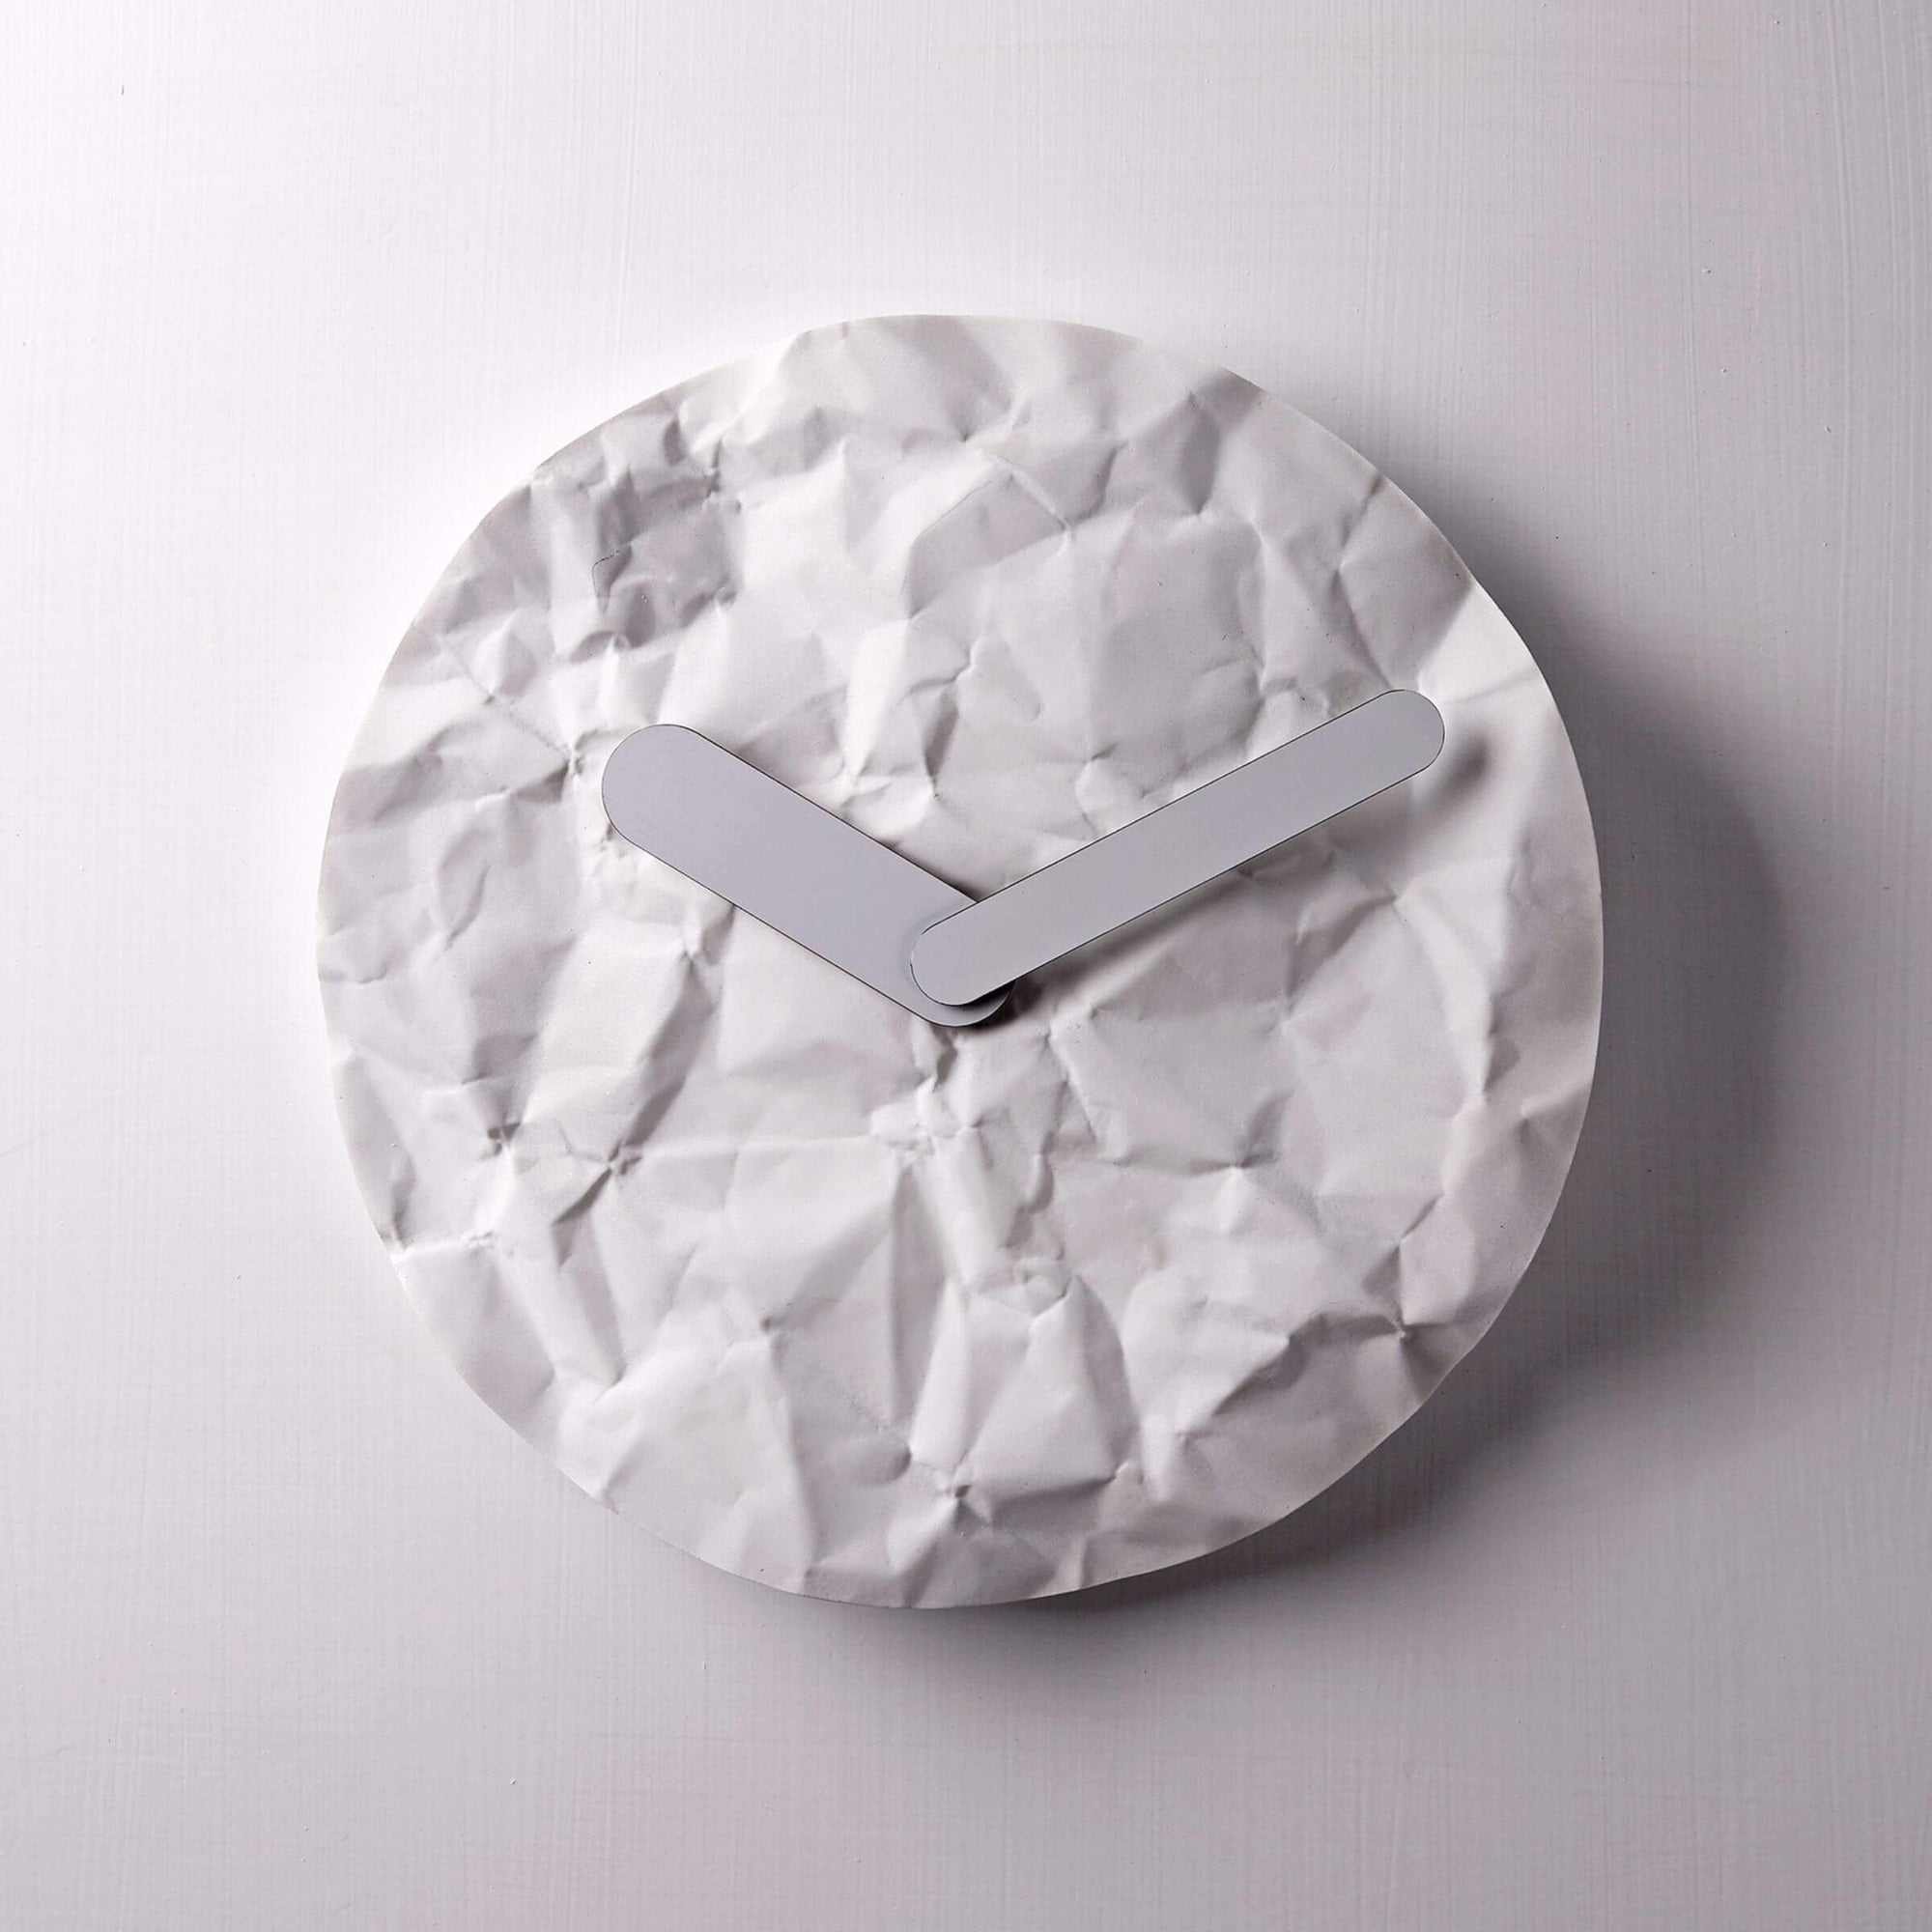 Modern wall clock - like just before or later, like a crumple paper